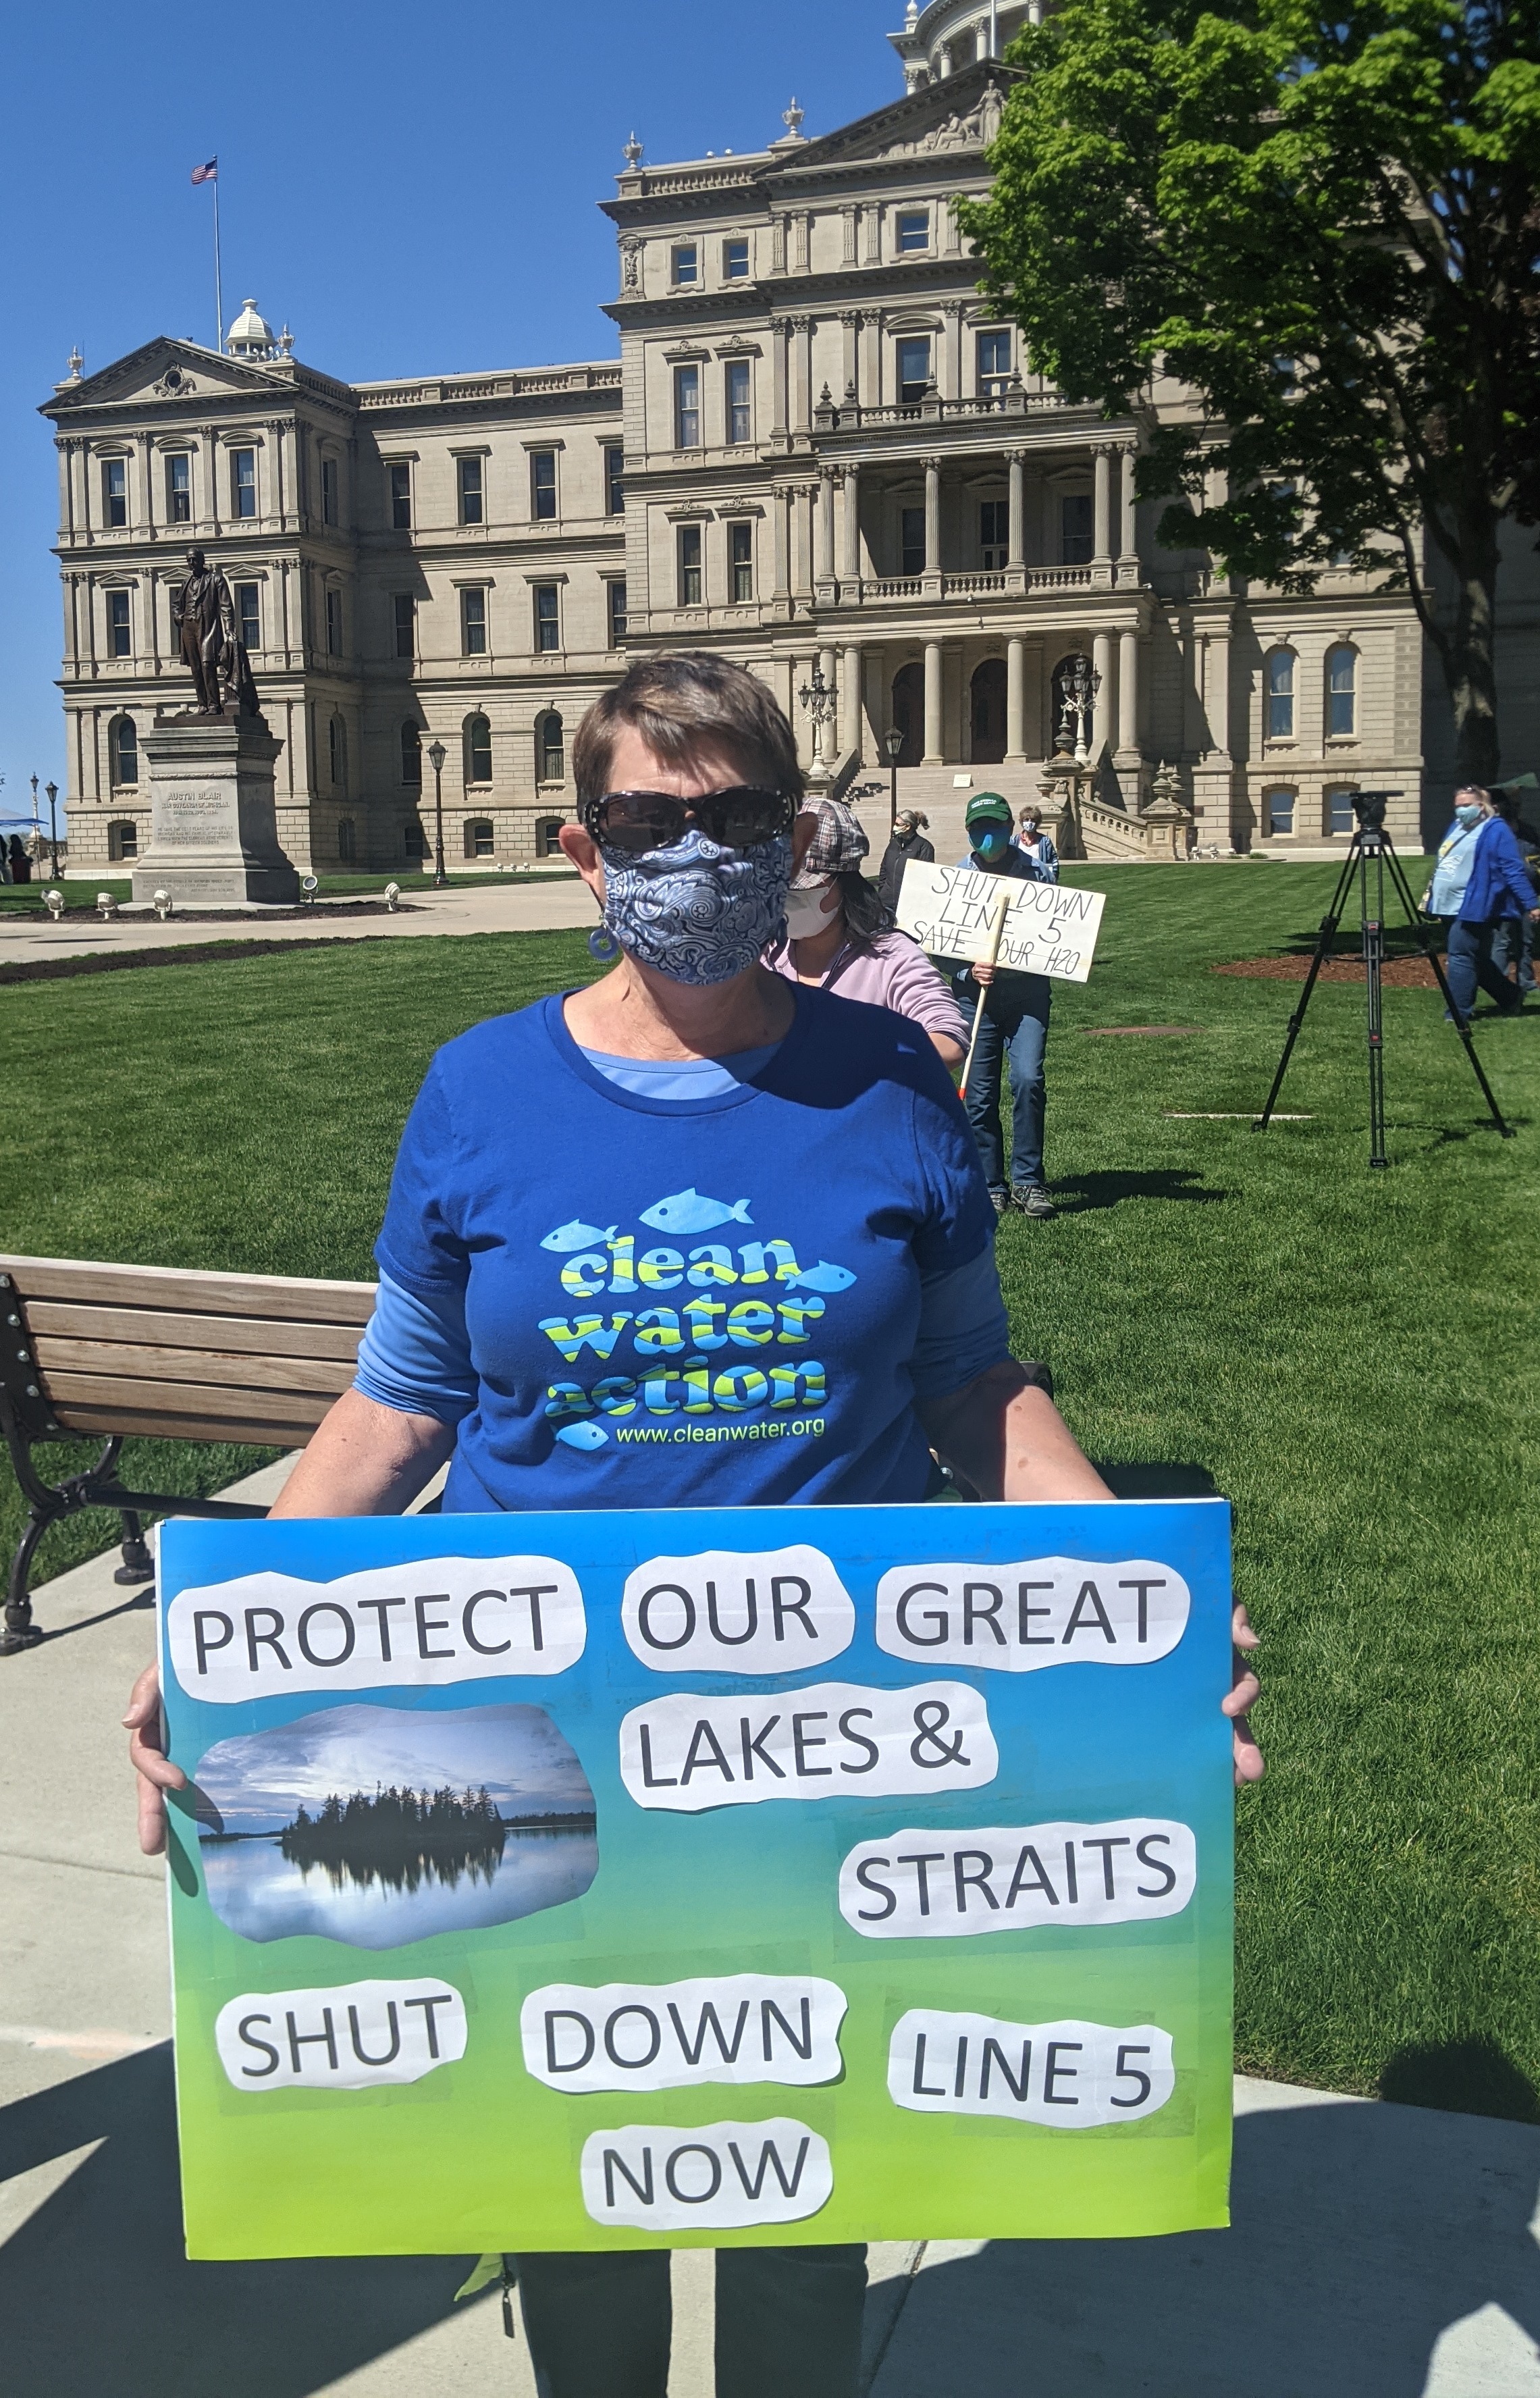 Protestor holding sign saying: "Protect Our Great Lakes & Straits, Shut Down Line 5 Now" in front of the MI state capitol building